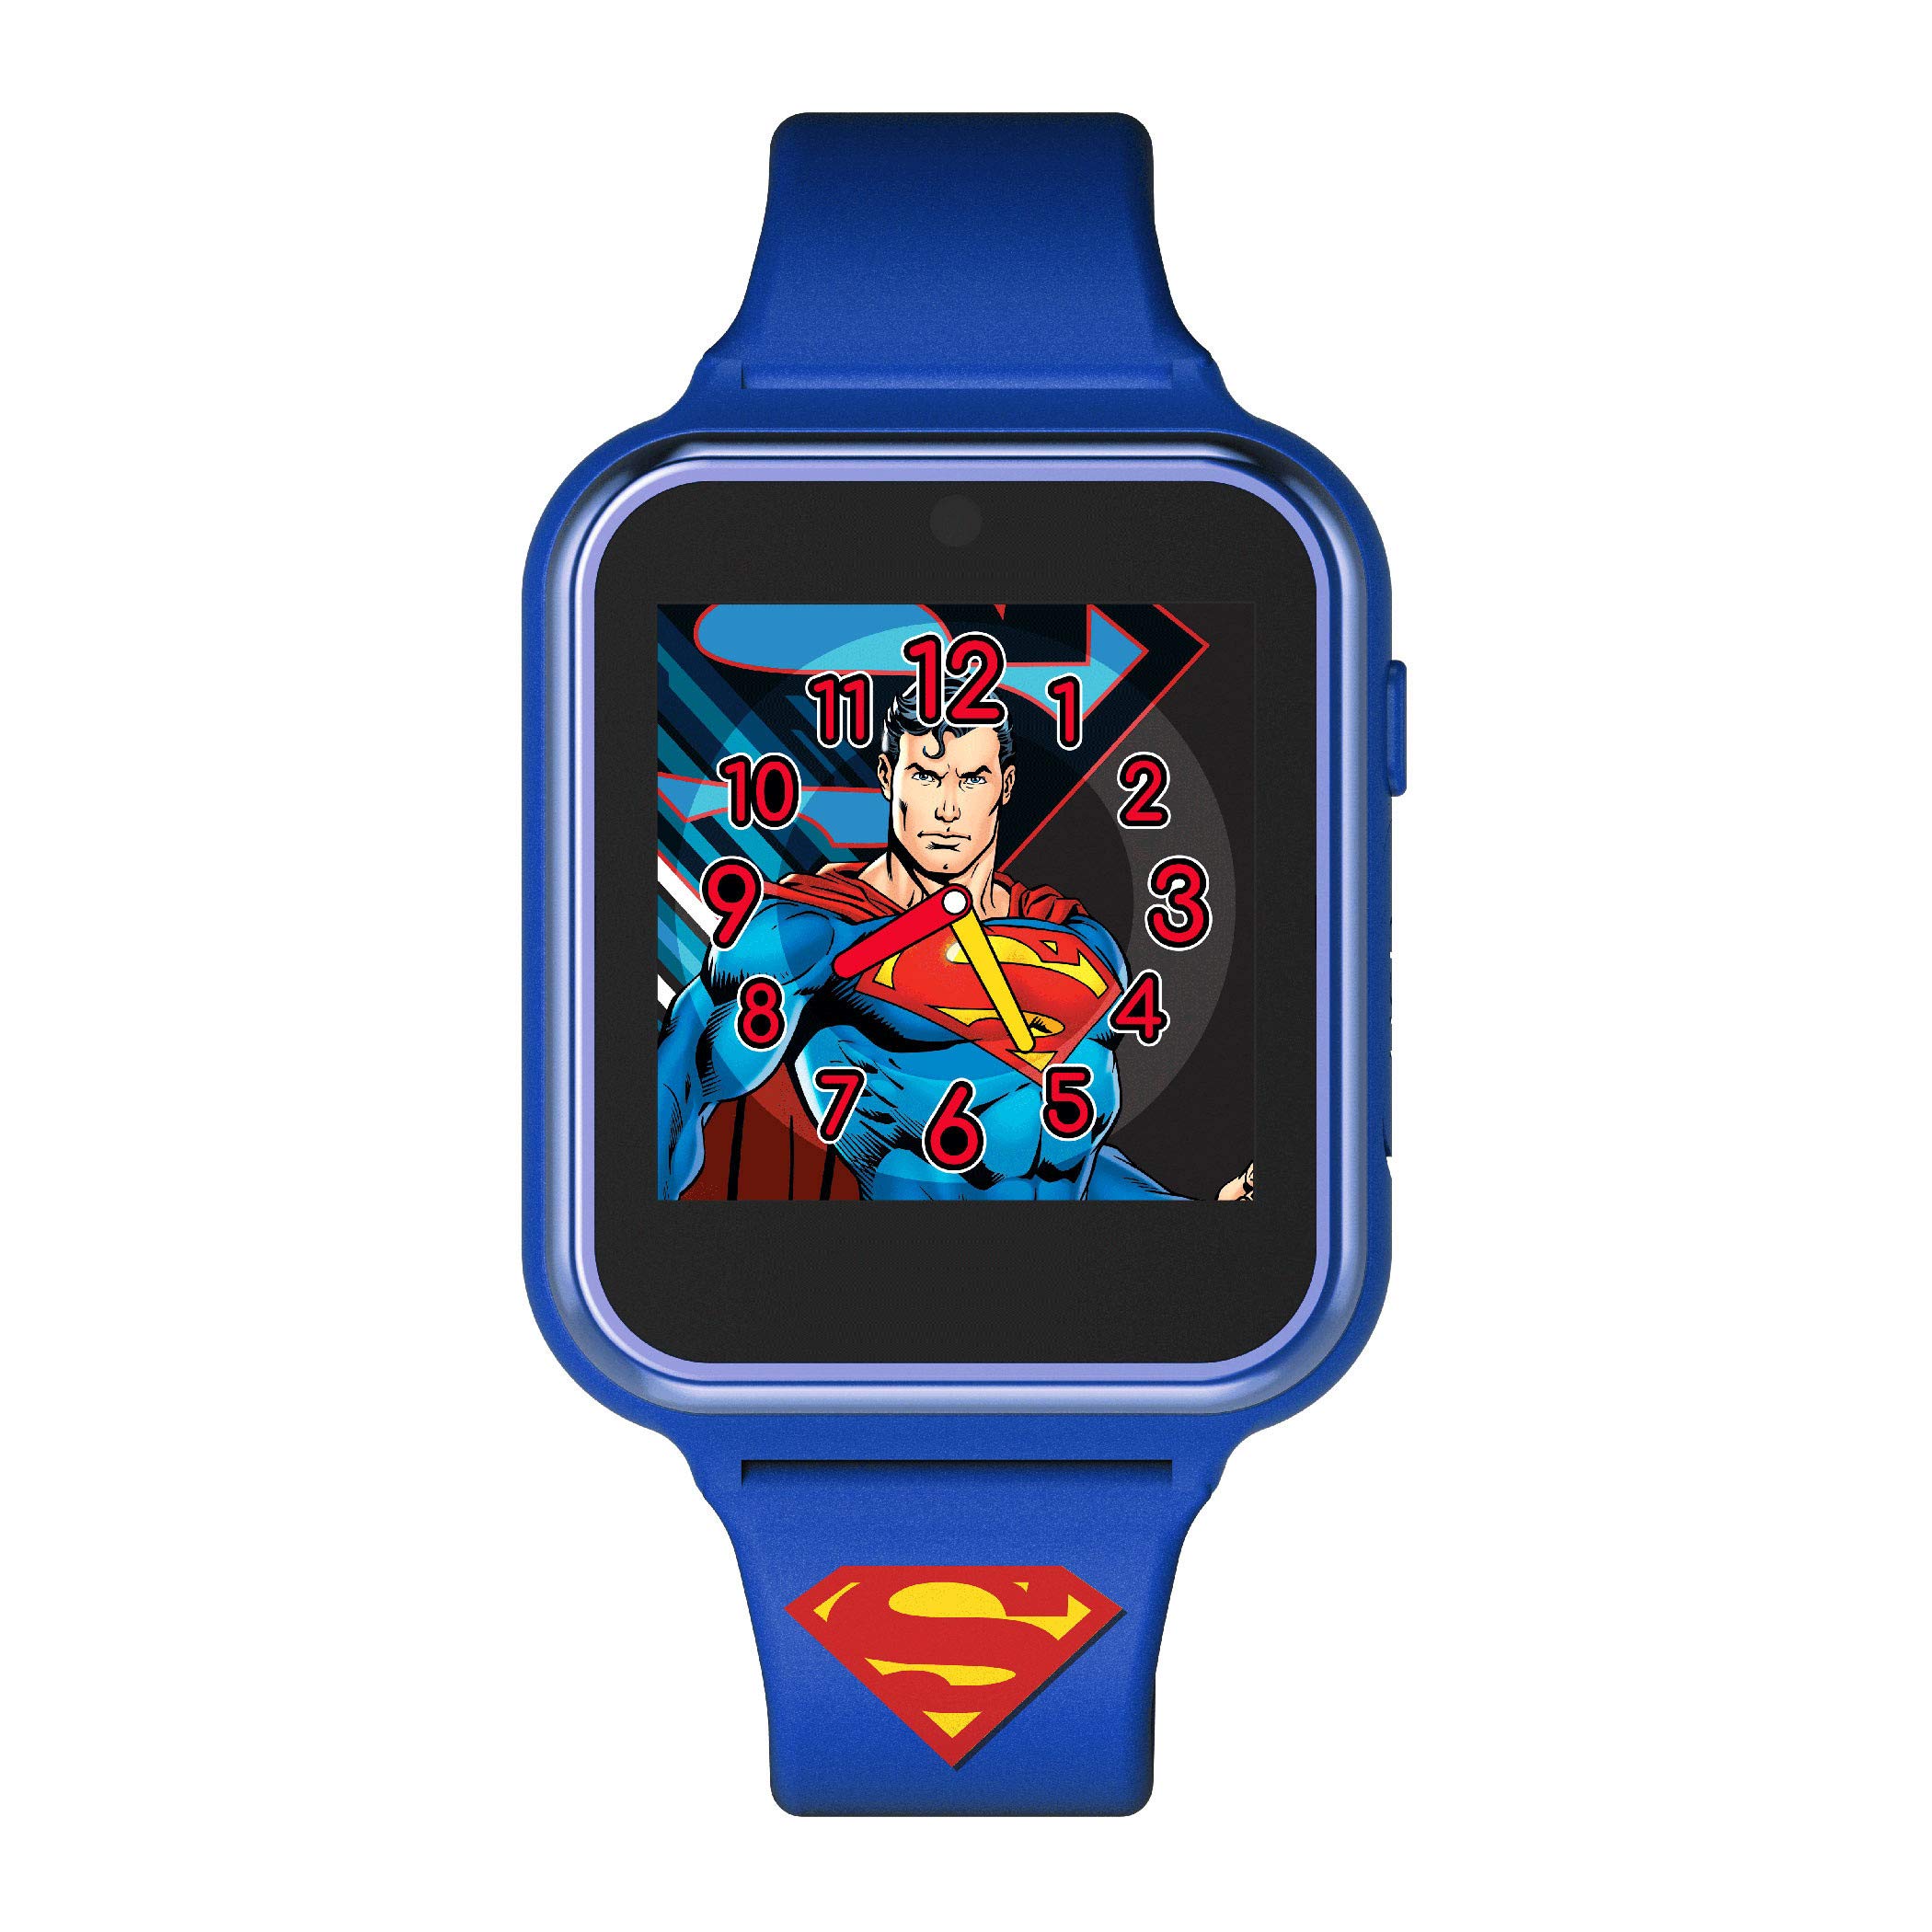 Accutime Kids DC Comics Superman Man of Steel Blue Educational Learning Touchscreen Smart Watch Toy for Boys, Girls, Toddlers - Selfie Cam, Learning Games, Pedometer and More (Model: SUP4360AZ)